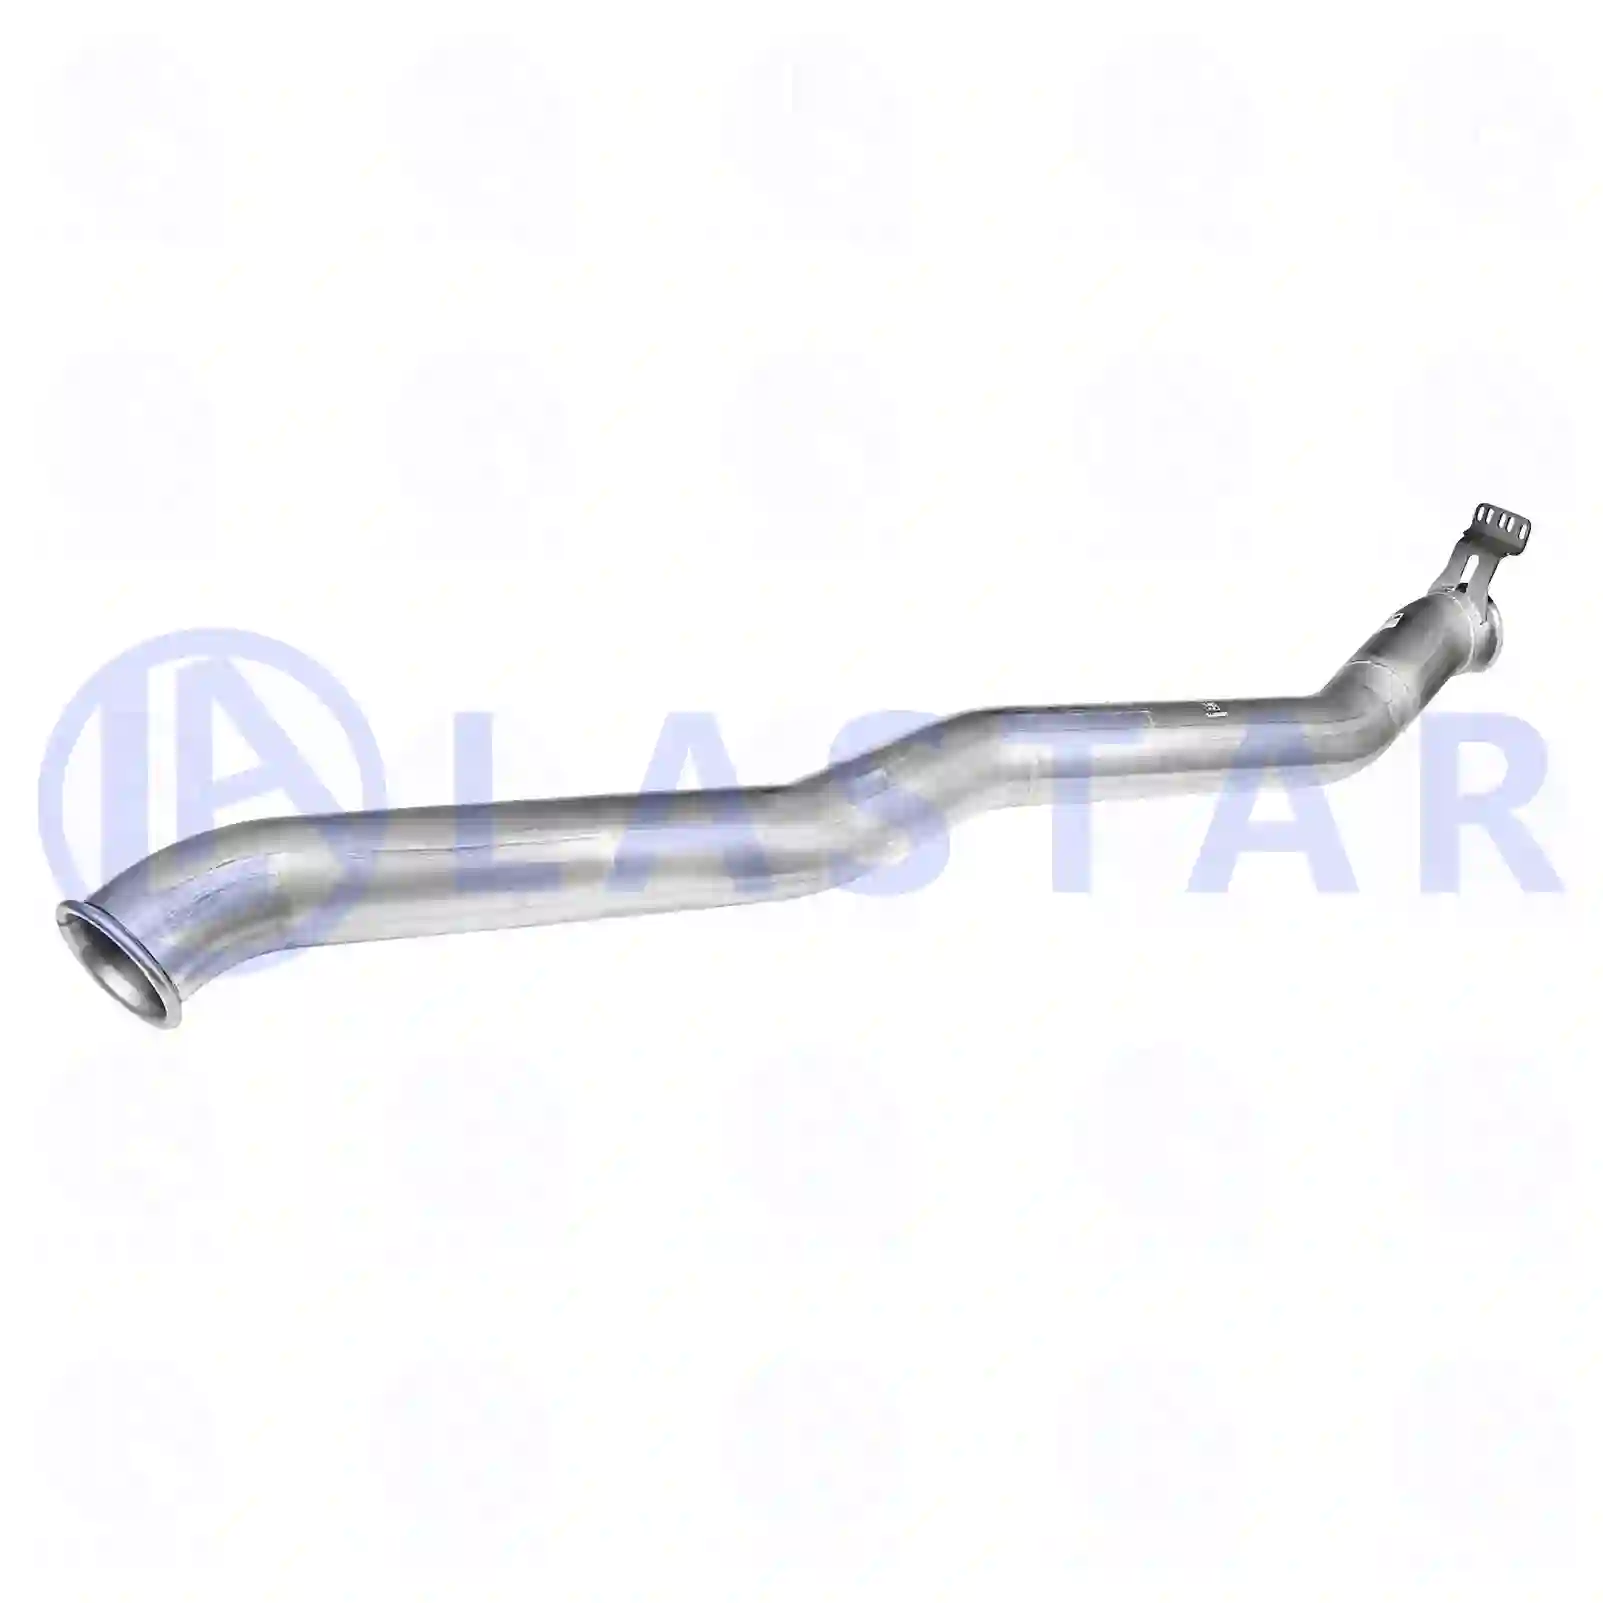 End pipe, 77706569, 1344151, 1397052, 1483278 ||  77706569 Lastar Spare Part | Truck Spare Parts, Auotomotive Spare Parts End pipe, 77706569, 1344151, 1397052, 1483278 ||  77706569 Lastar Spare Part | Truck Spare Parts, Auotomotive Spare Parts